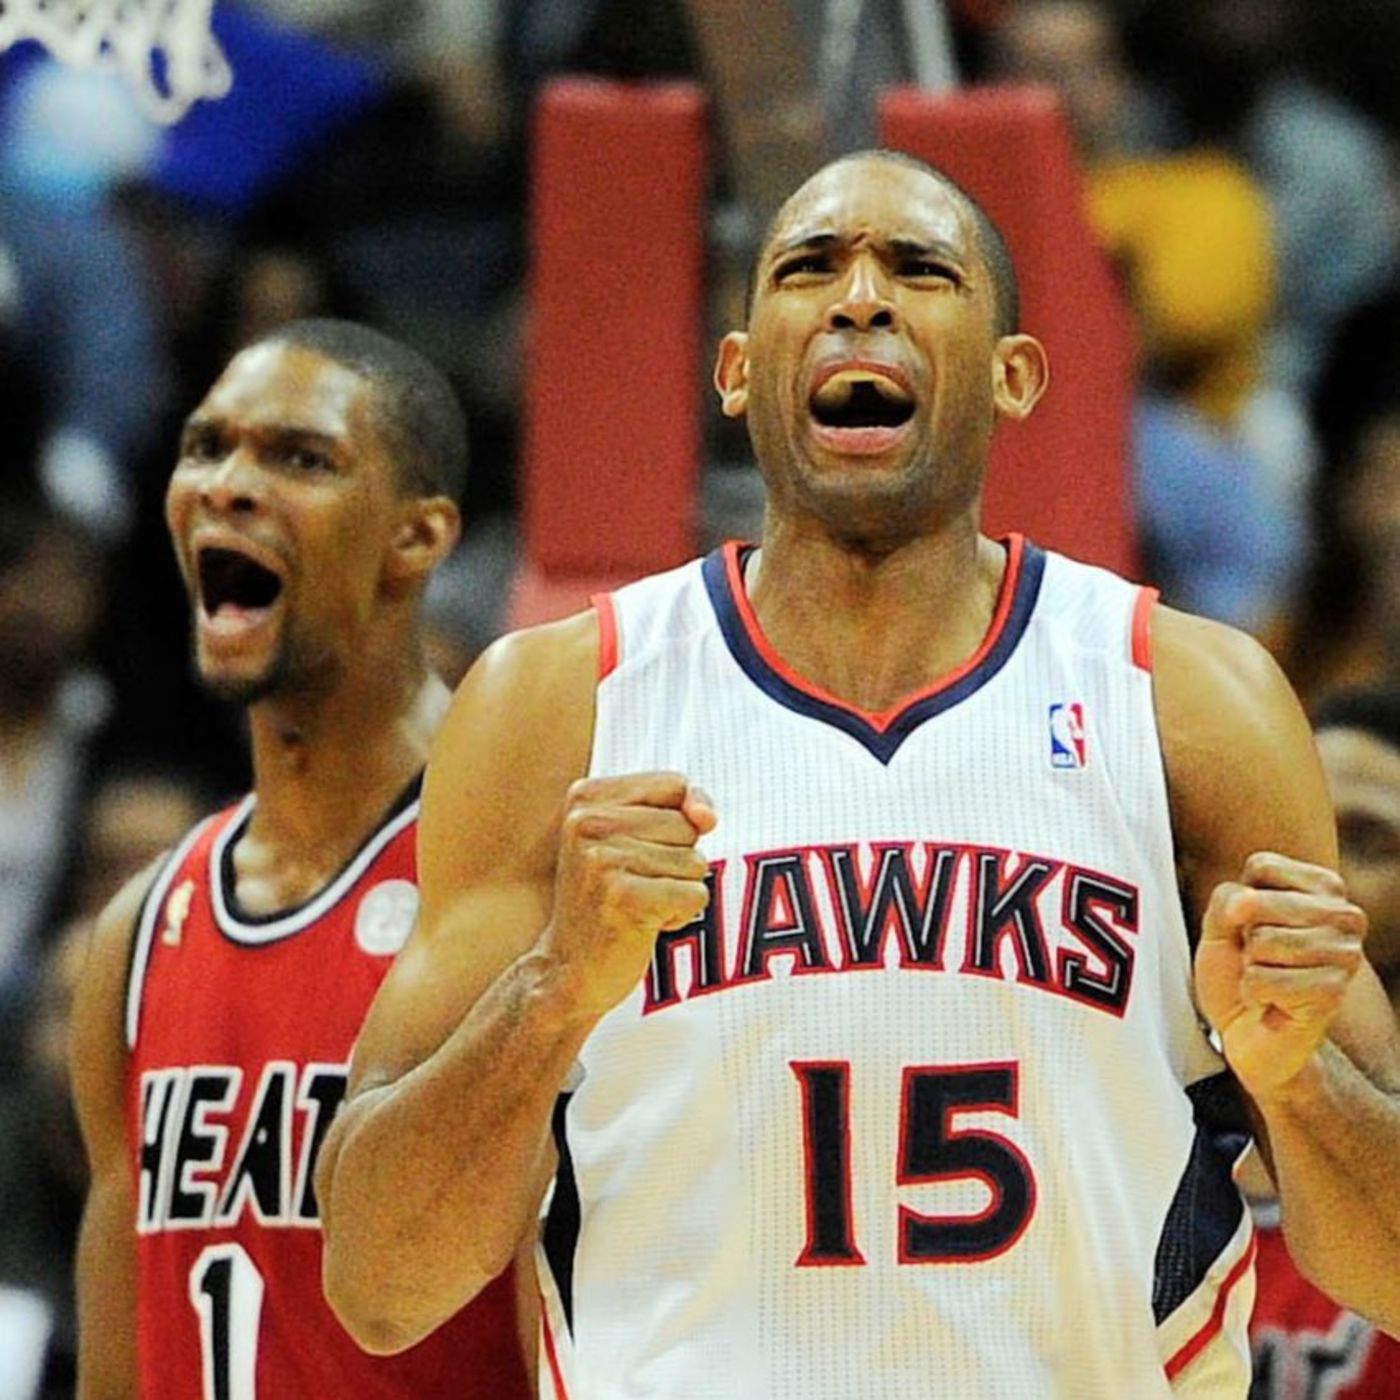 Al Horford's future in Atlanta and why Chris Bosh pulled out of All-Star game